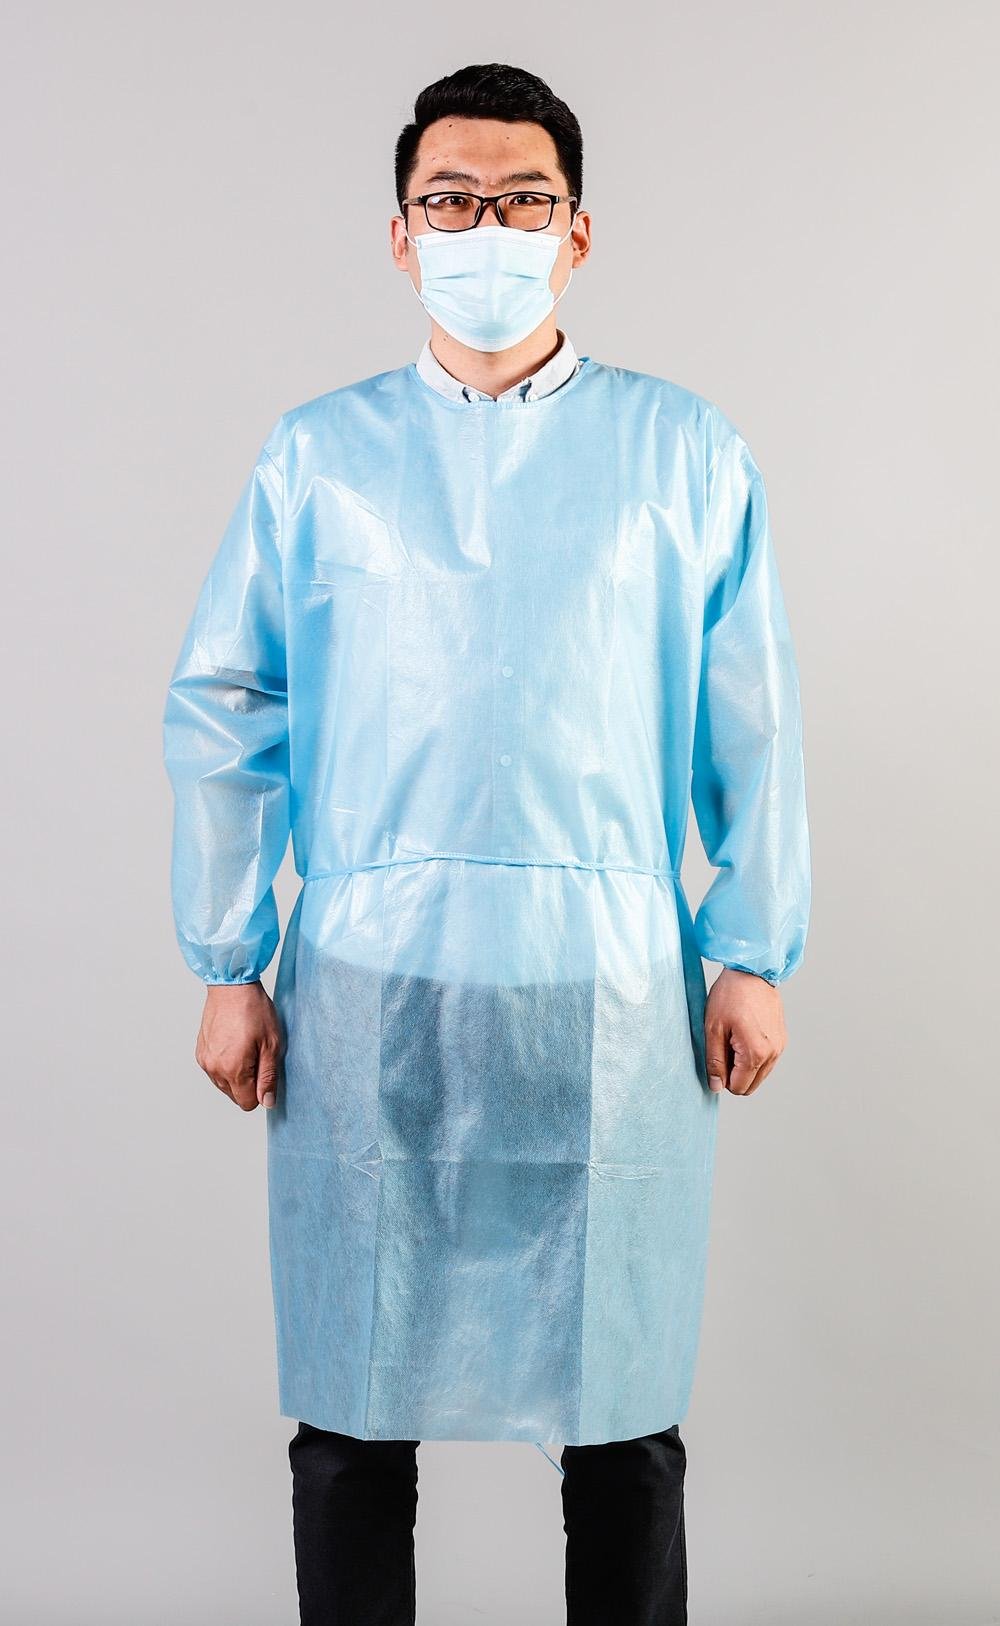 Easeng Medical Isolation Gown Disposable Coat Type Nonwoven Blue 2